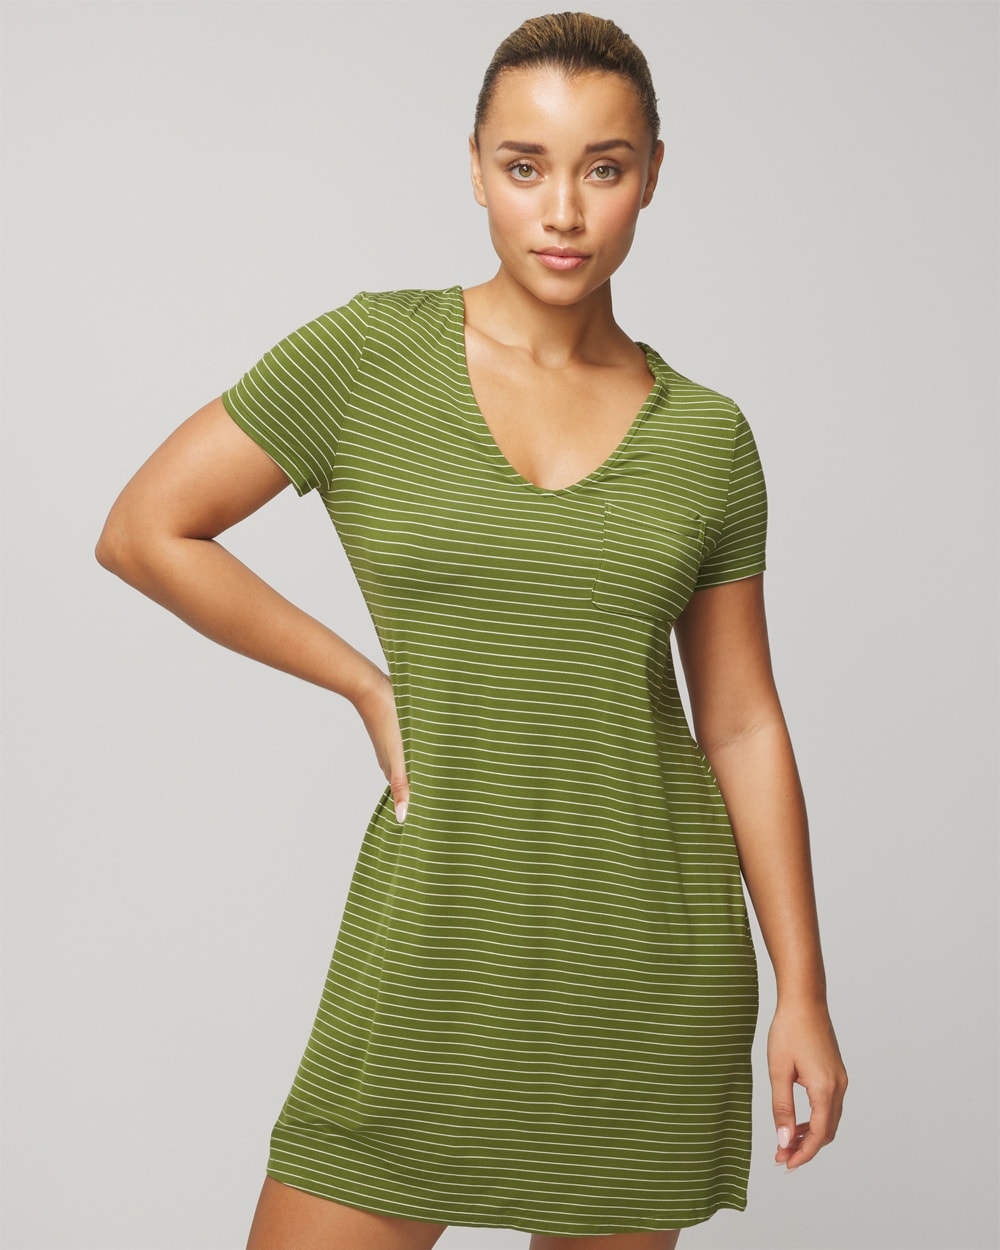 SOMA WOMEN'S COOL NIGHTS SHORT SLEEVE NIGHT GOWN IN MATCHA GREEN SIZE XS | SOMA